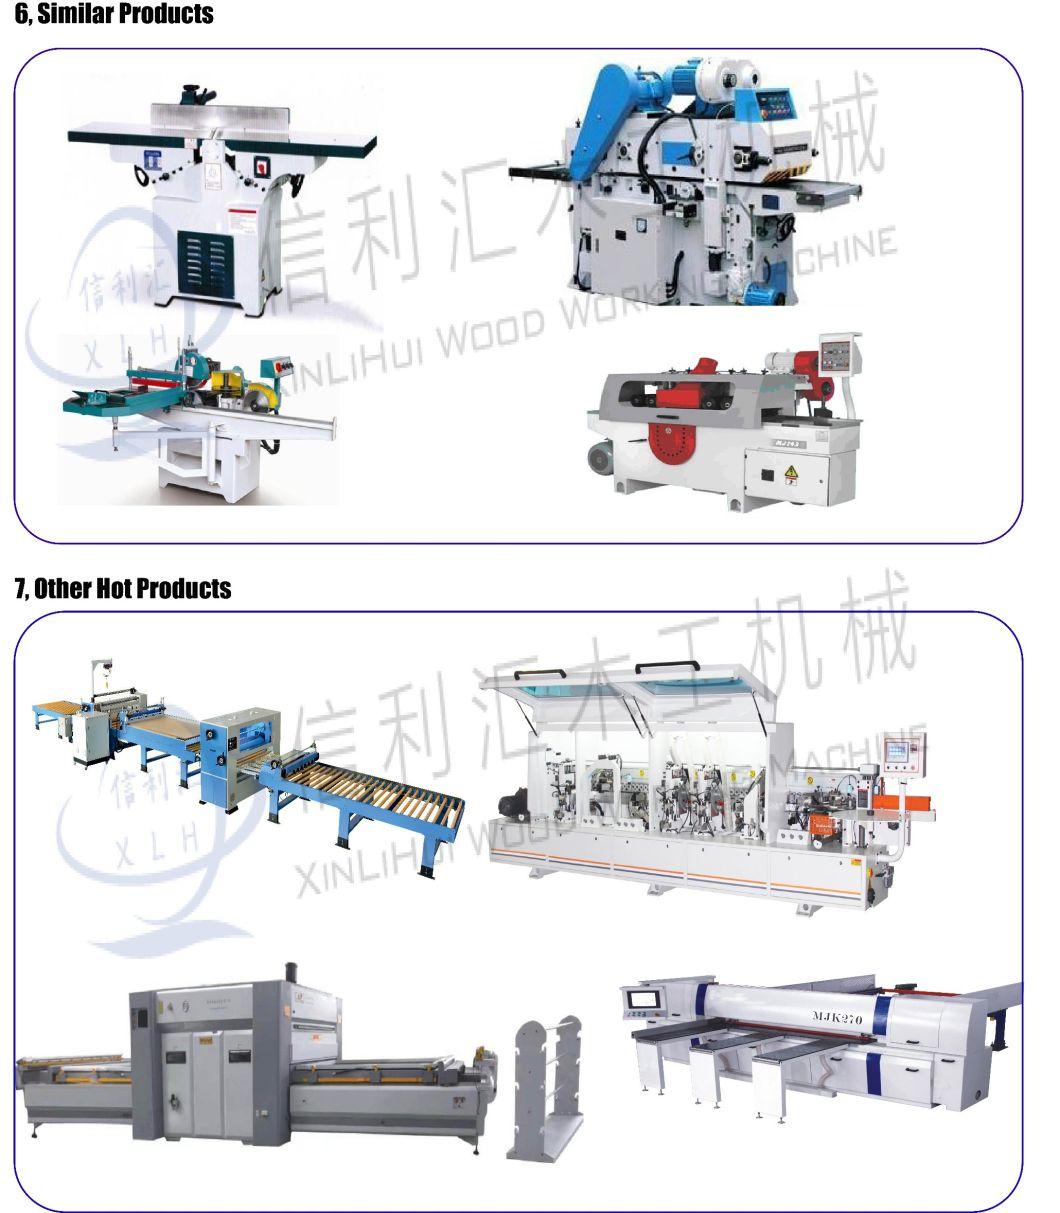 Surface Planer Thickness Planer Combine Machine/ Surface Planner Planning Machine Spiral Planner, Spiral Planner Wood Single Side Planer